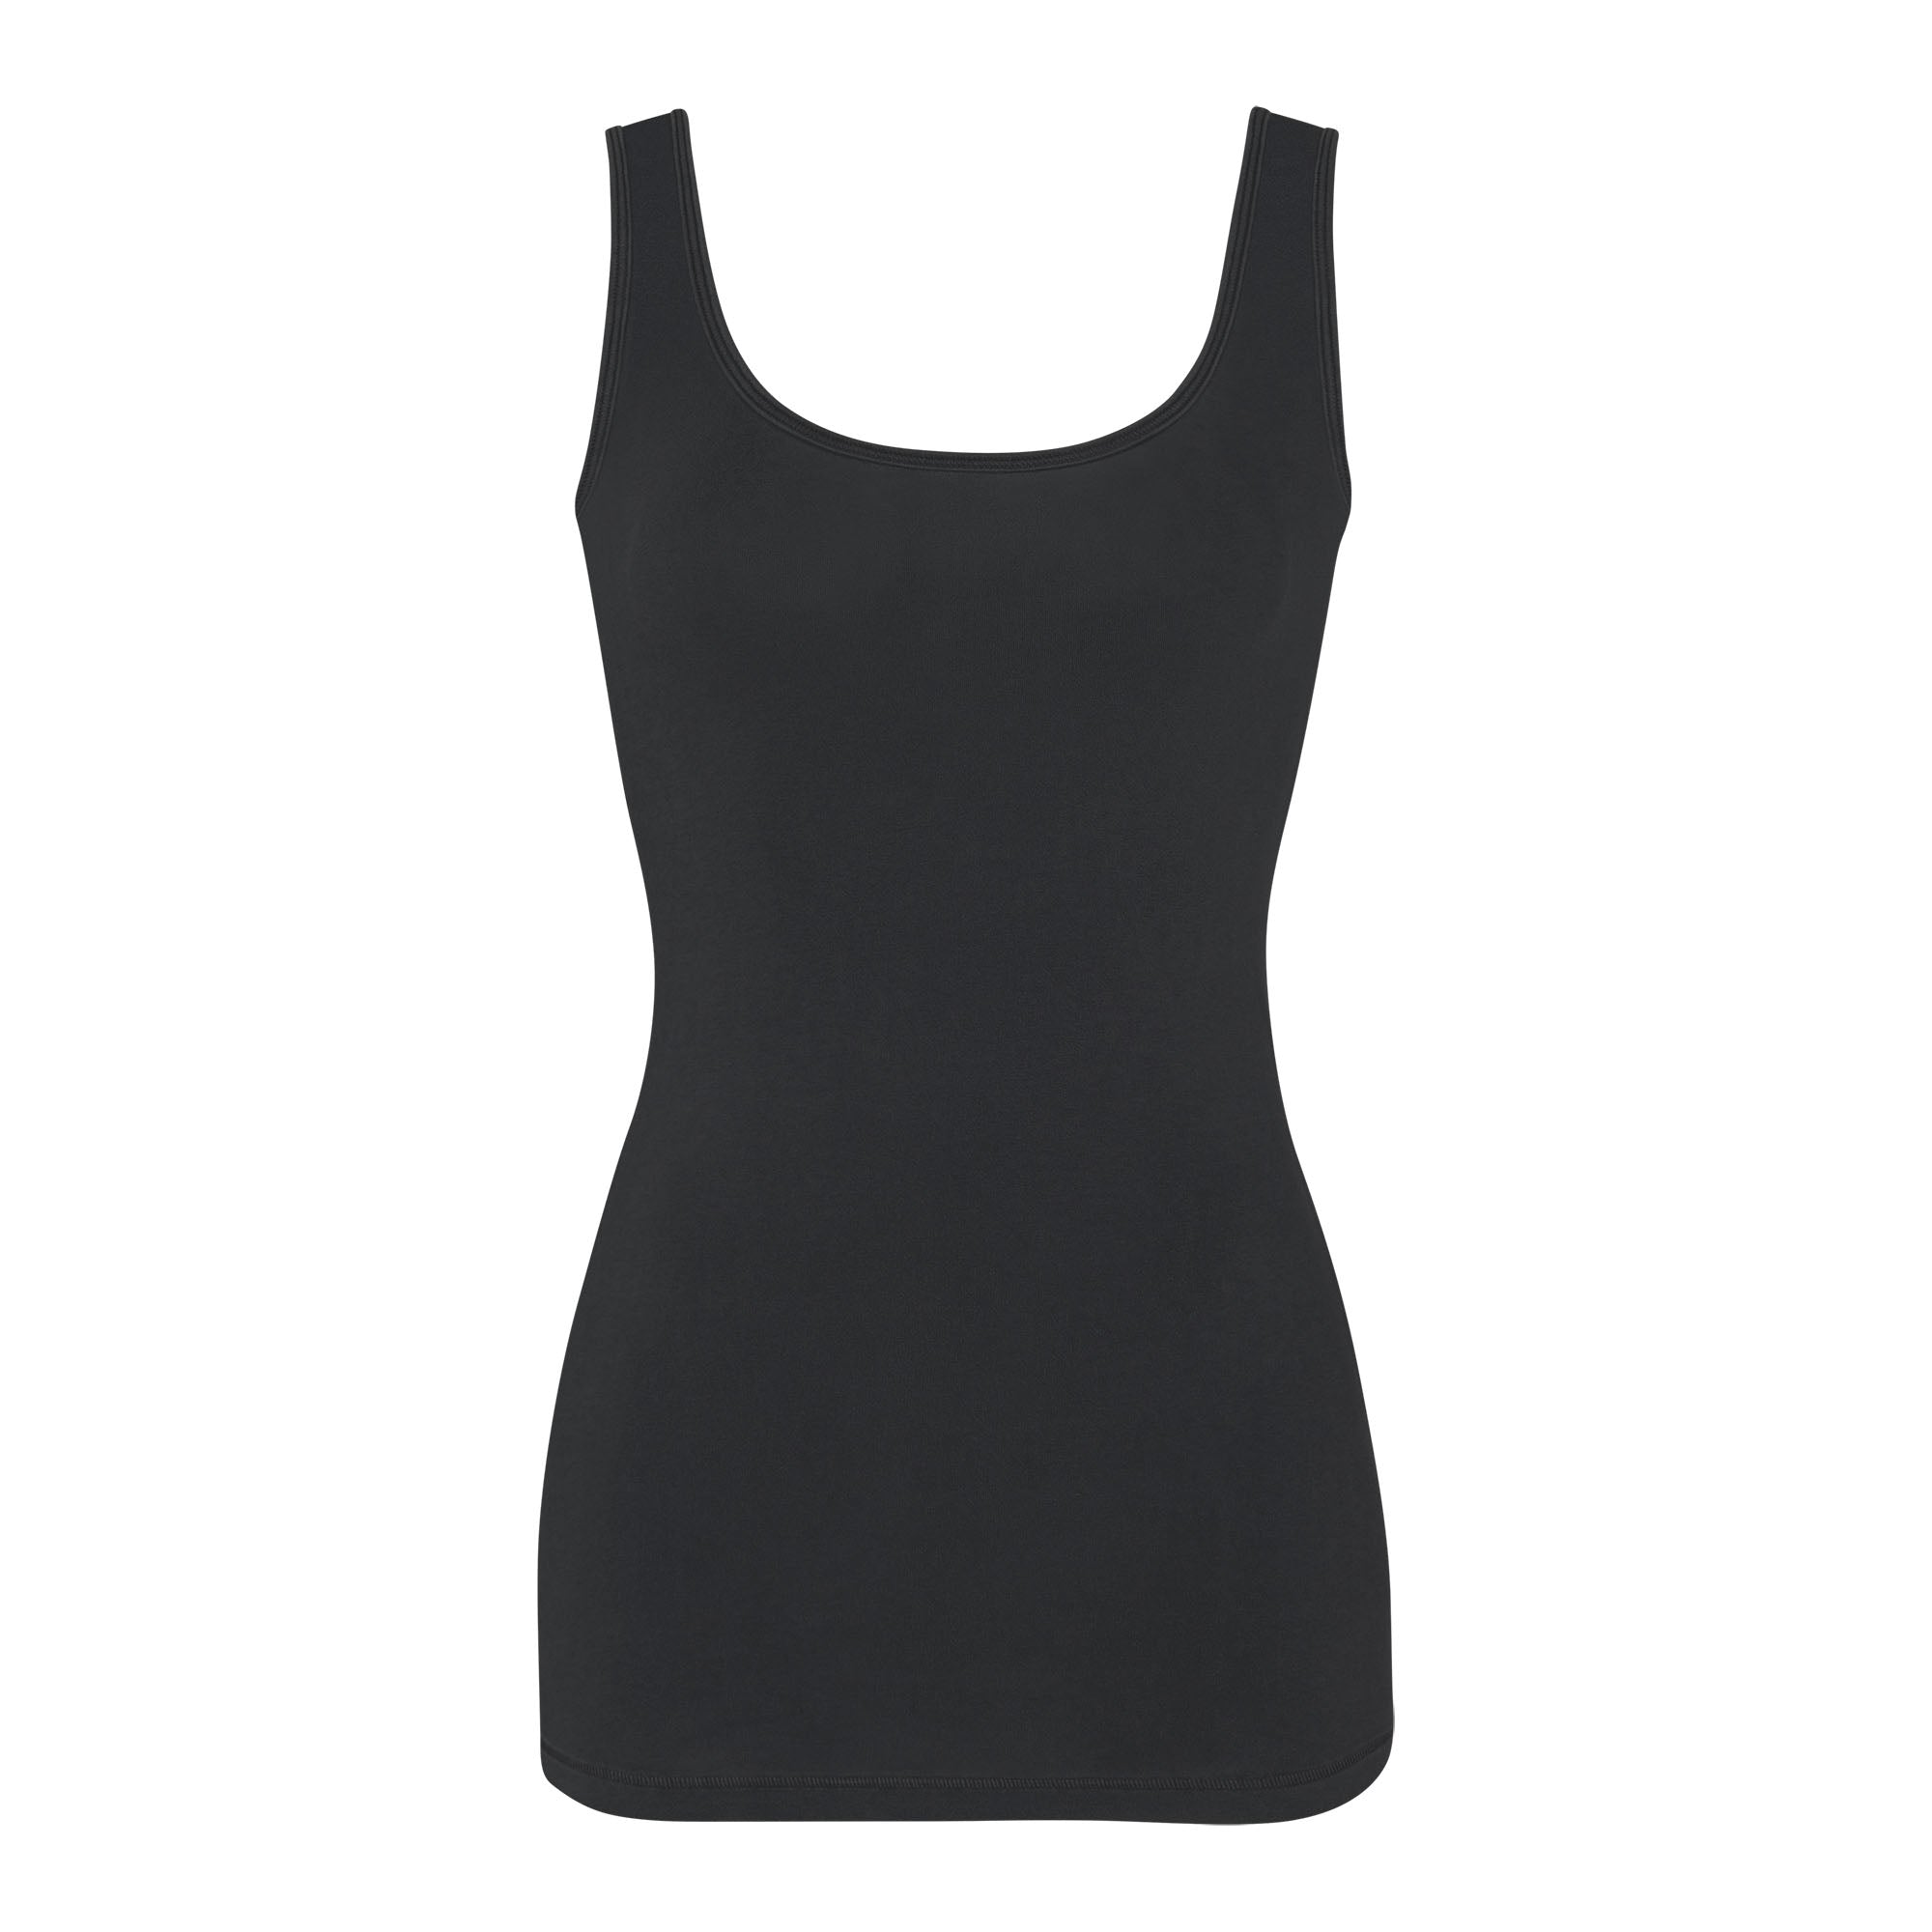 NEW VINTAGE SCOOP NECK TANK | WASHED ONYX - NEW VINTAGE SCOOP NECK TANK ...